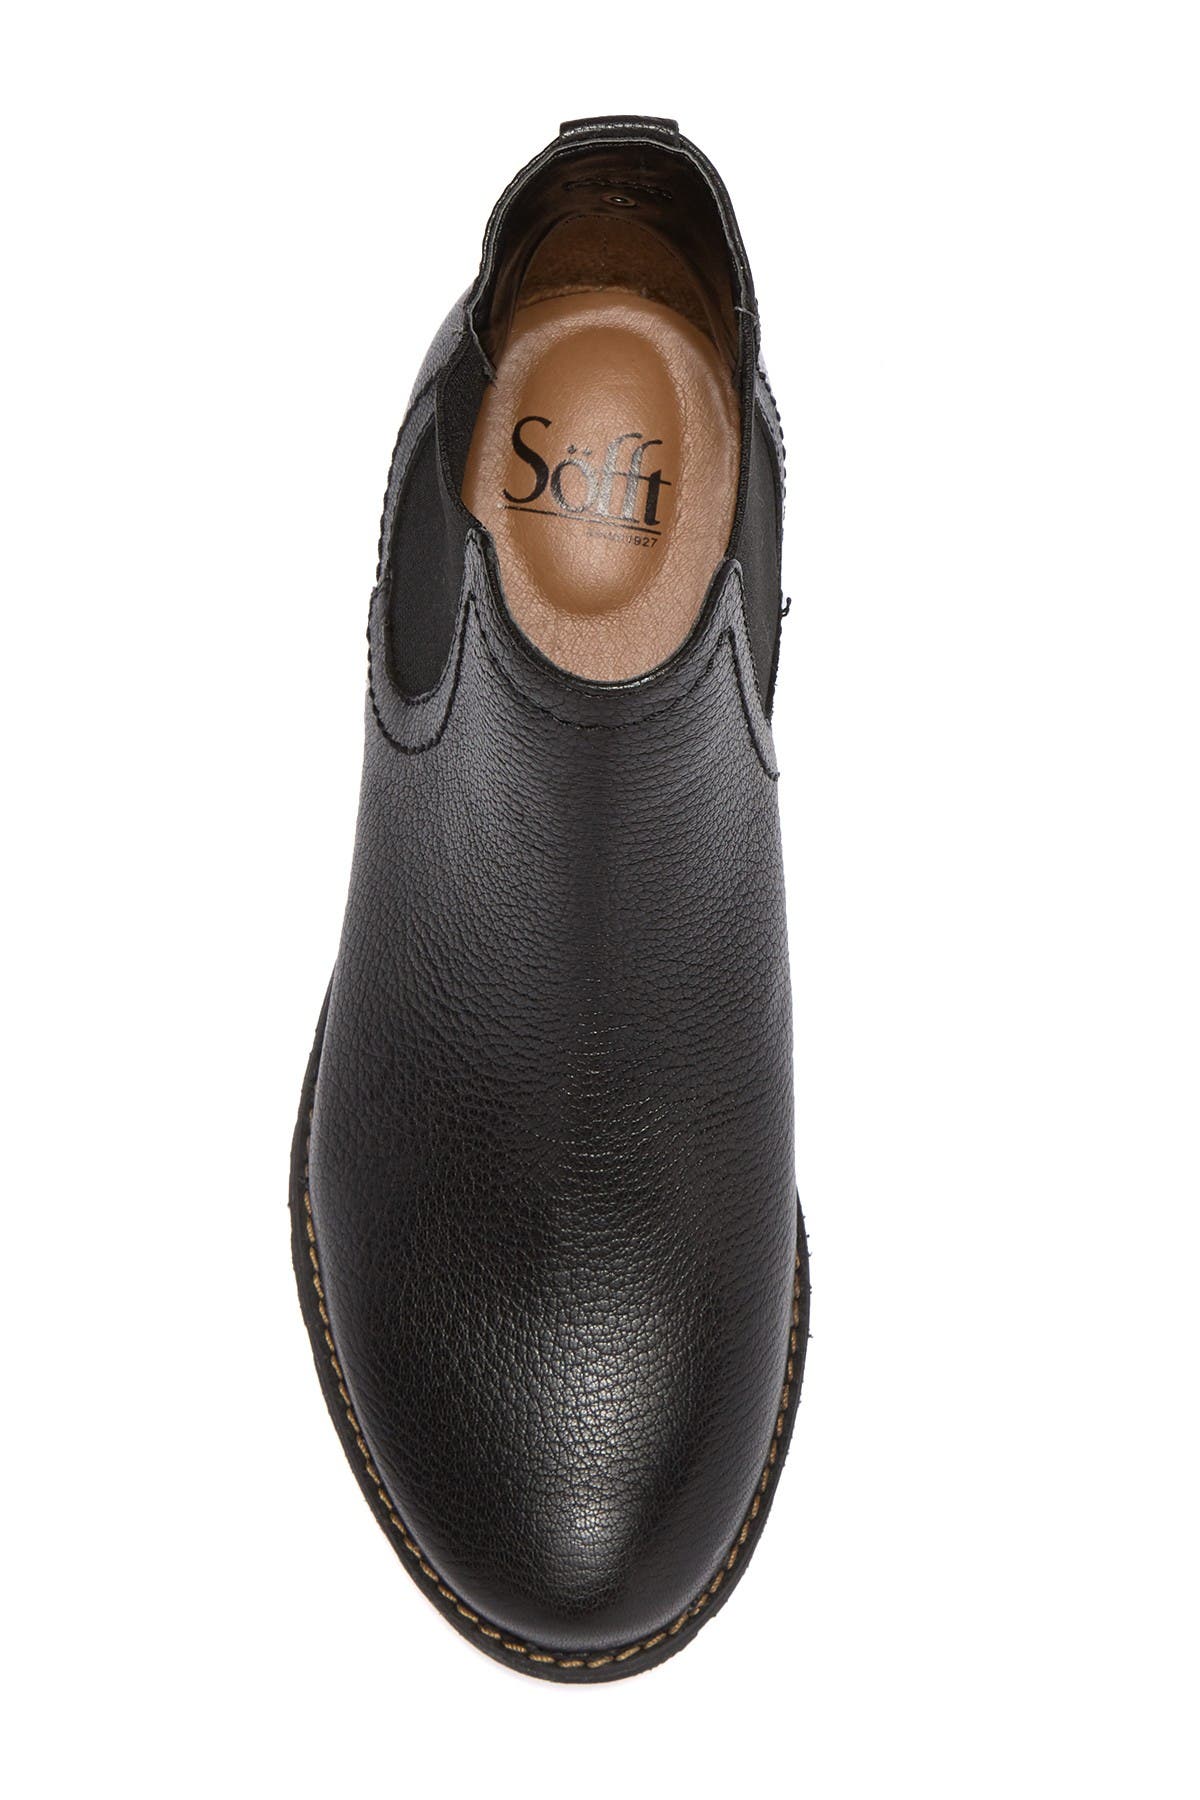 sherwood leather chelsea boot